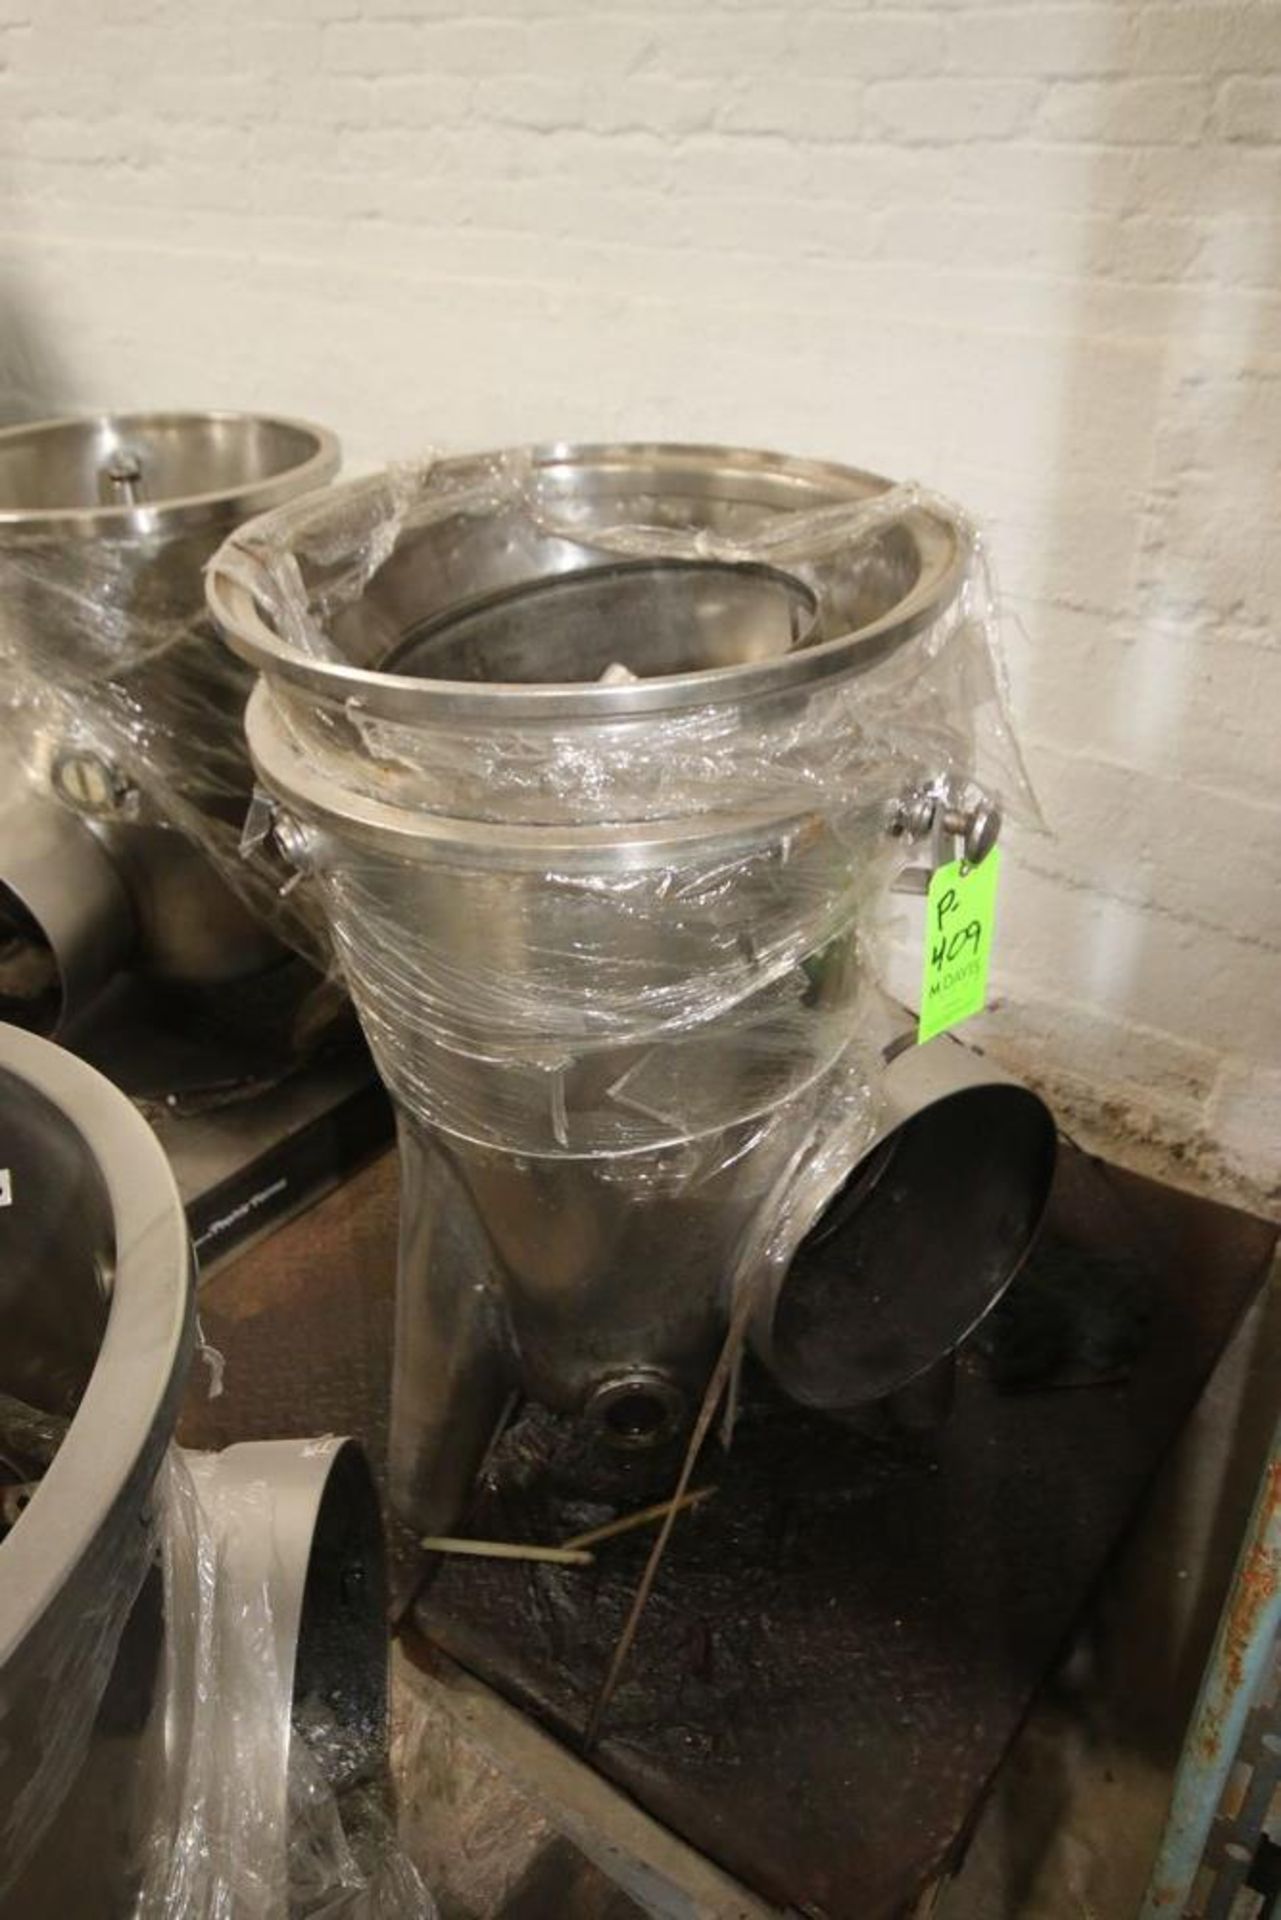 S/S Separator Inc. Separator Bodies, with S/S Separator Disks & S/S Separator Bowls (TG) - Image 12 of 20